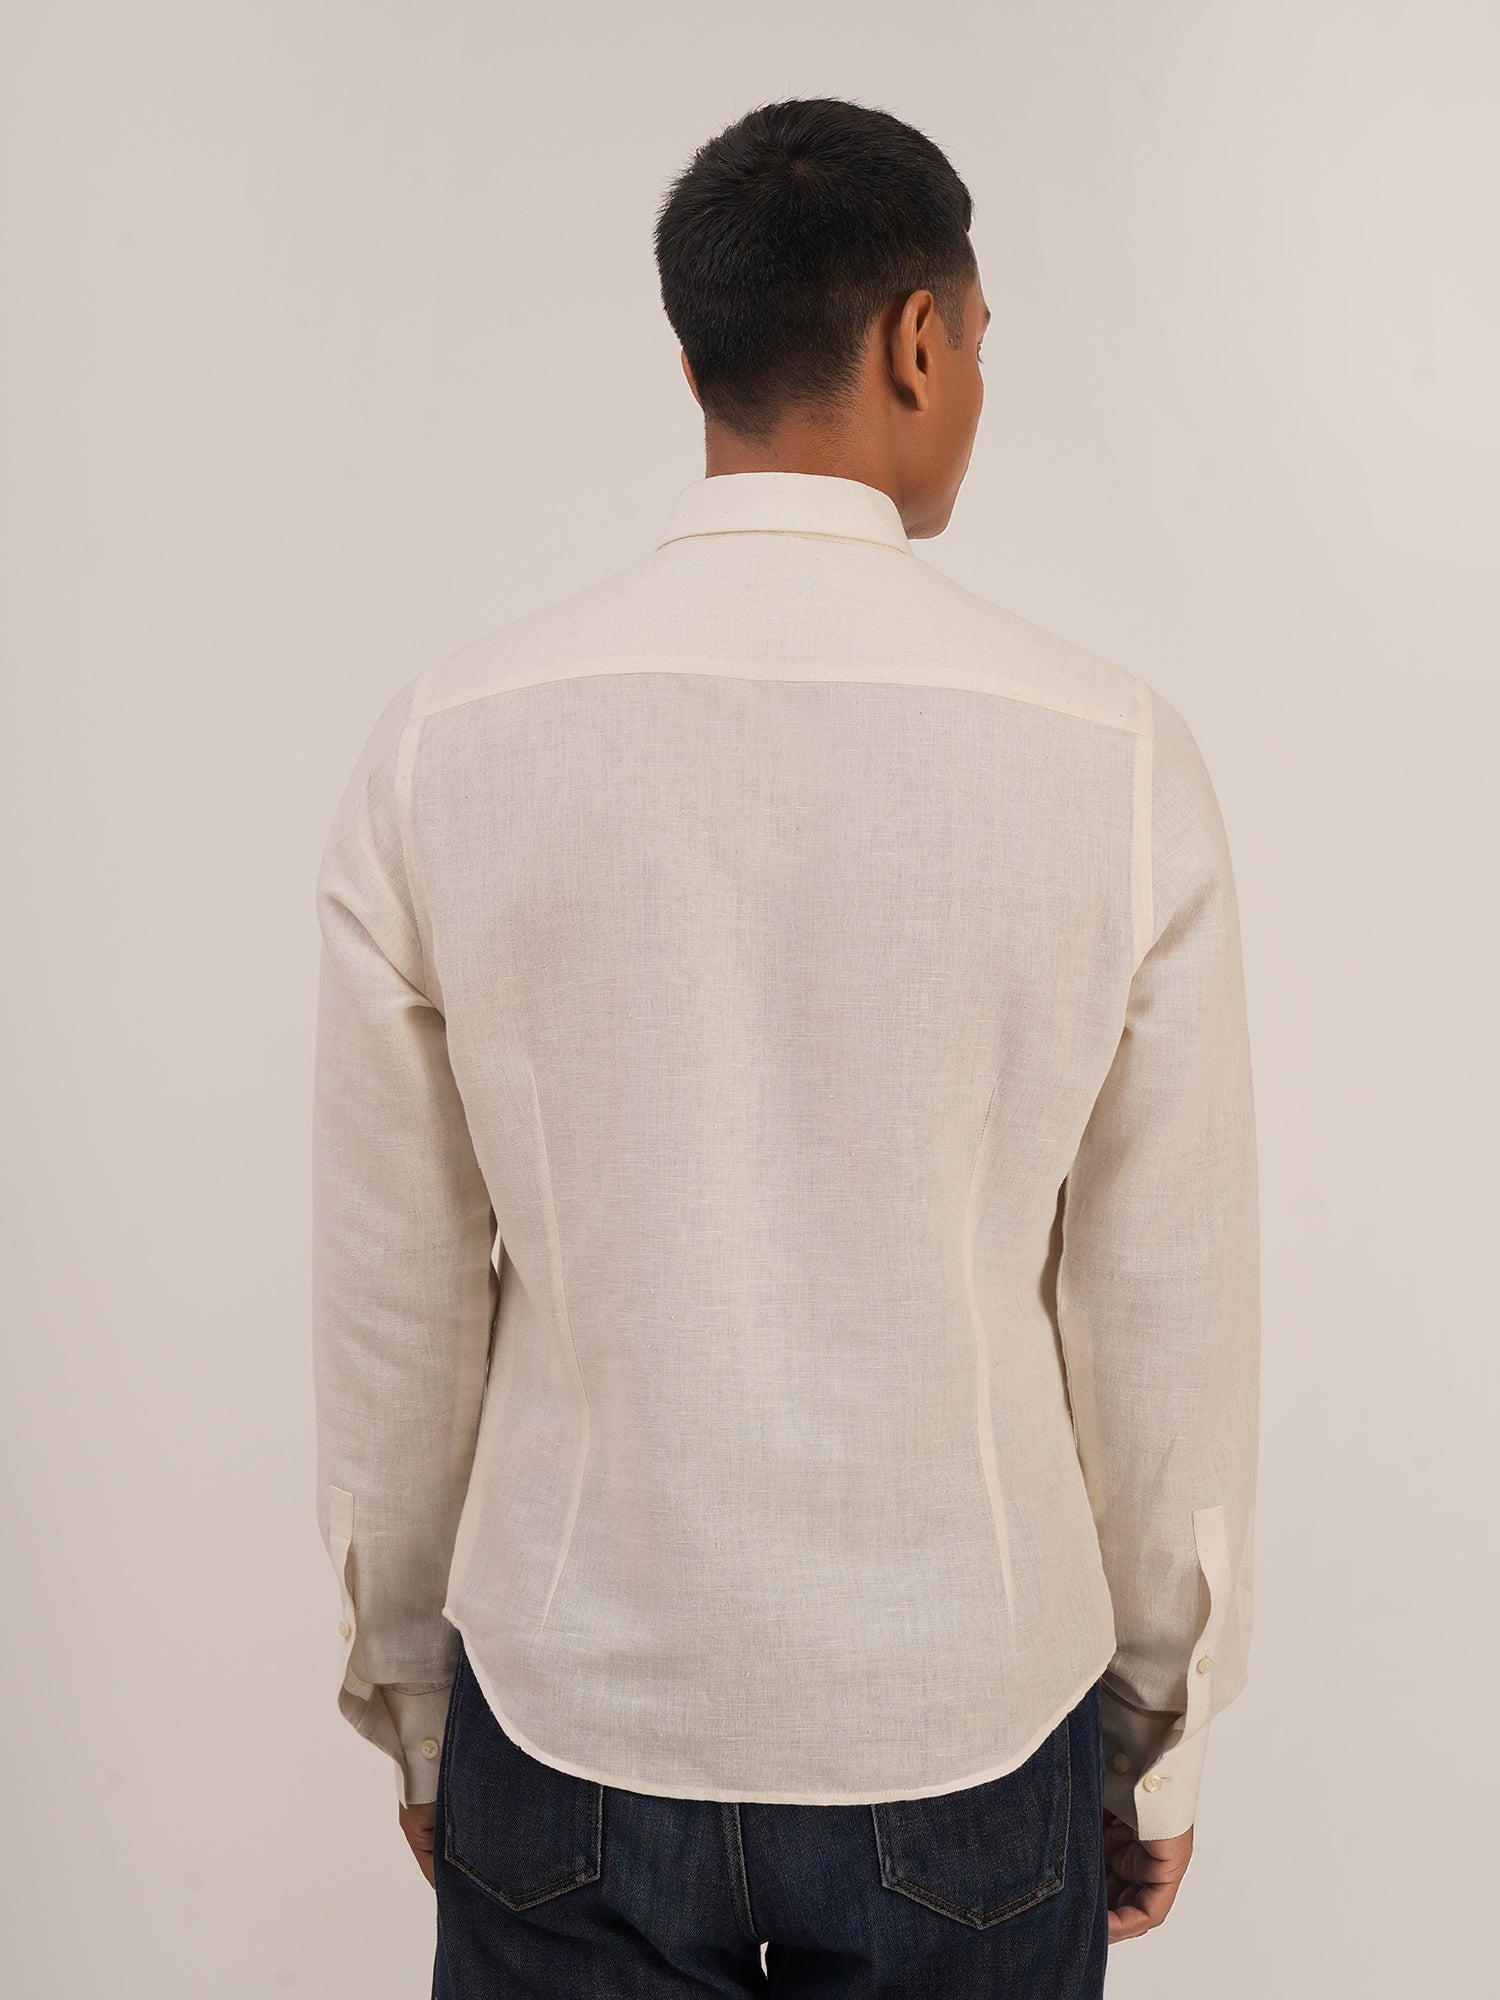 Curved Placket Shirt